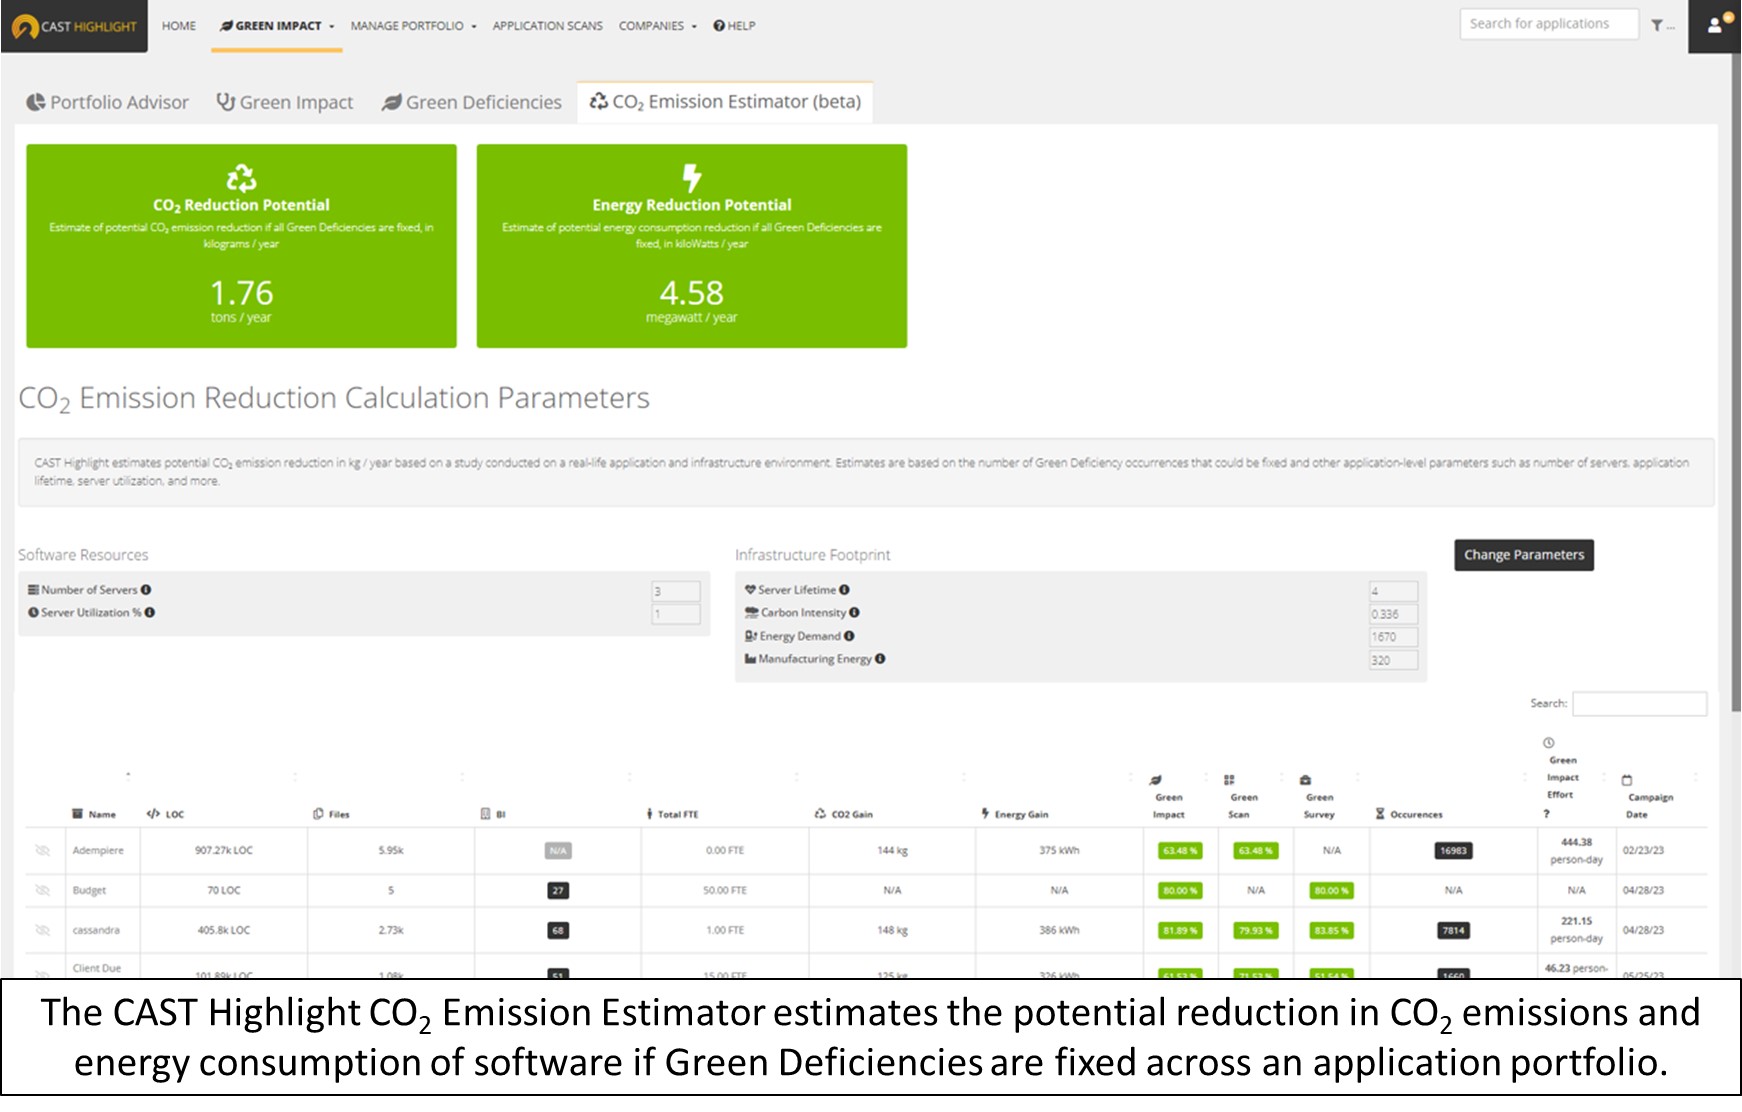 CAST launches new CO2 Emission Estimator in CAST Highlight